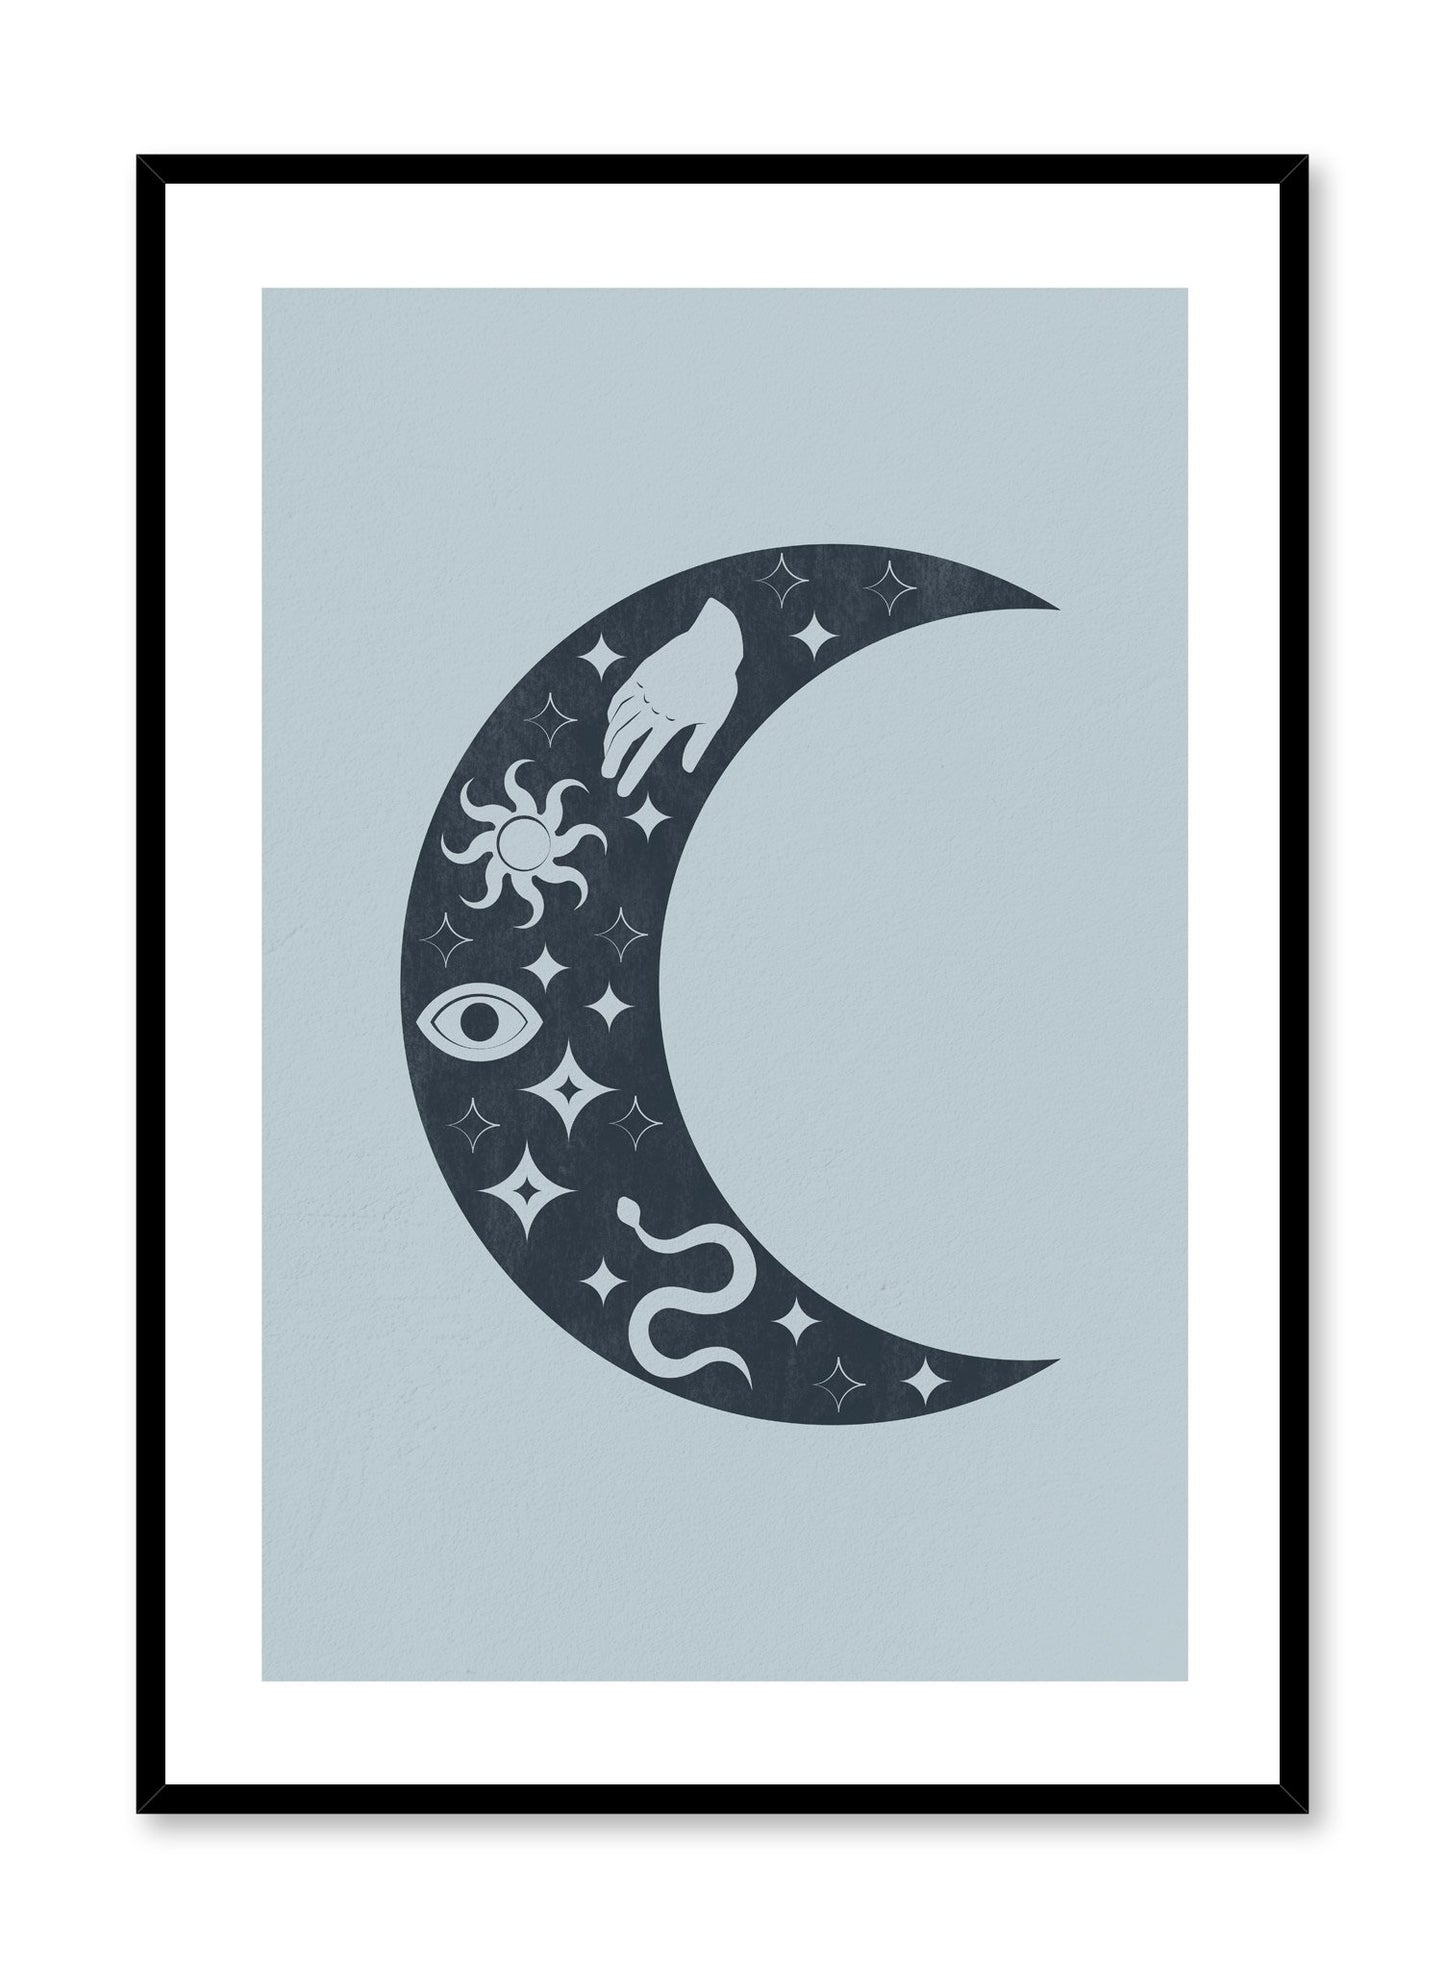 Celestial illustration poster by Opposite Wall with Blue Moon